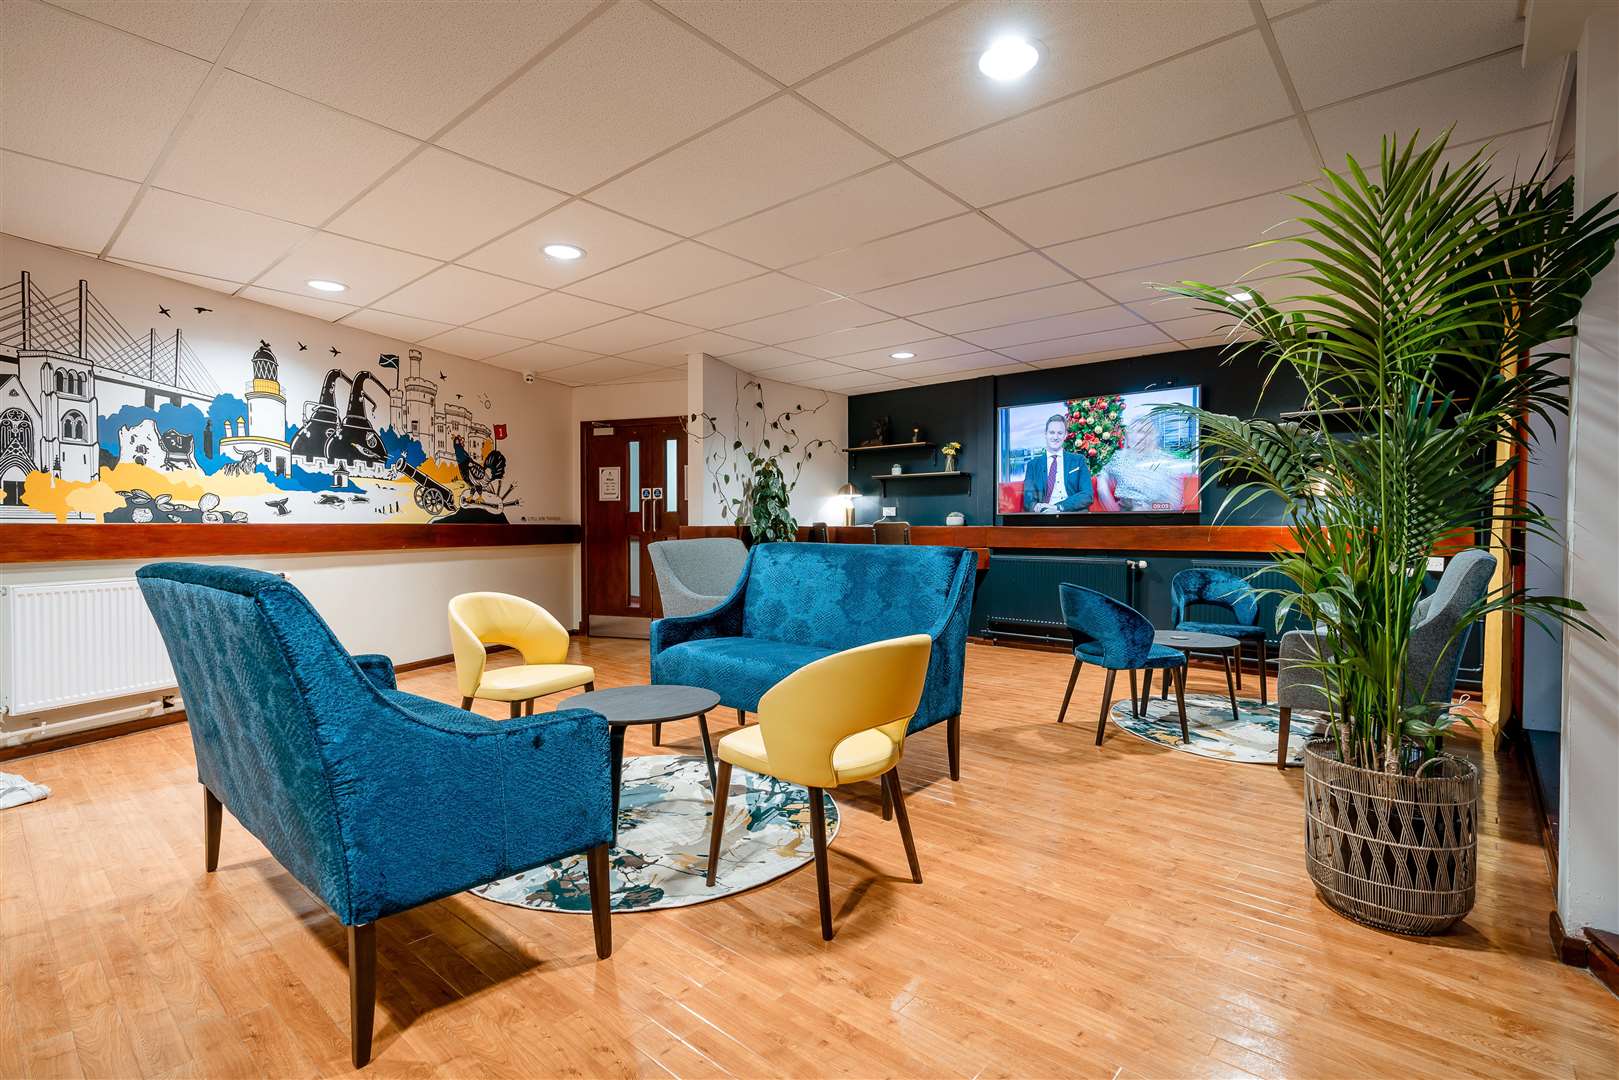 The hostel has an upgraded reception area including a 75in television.